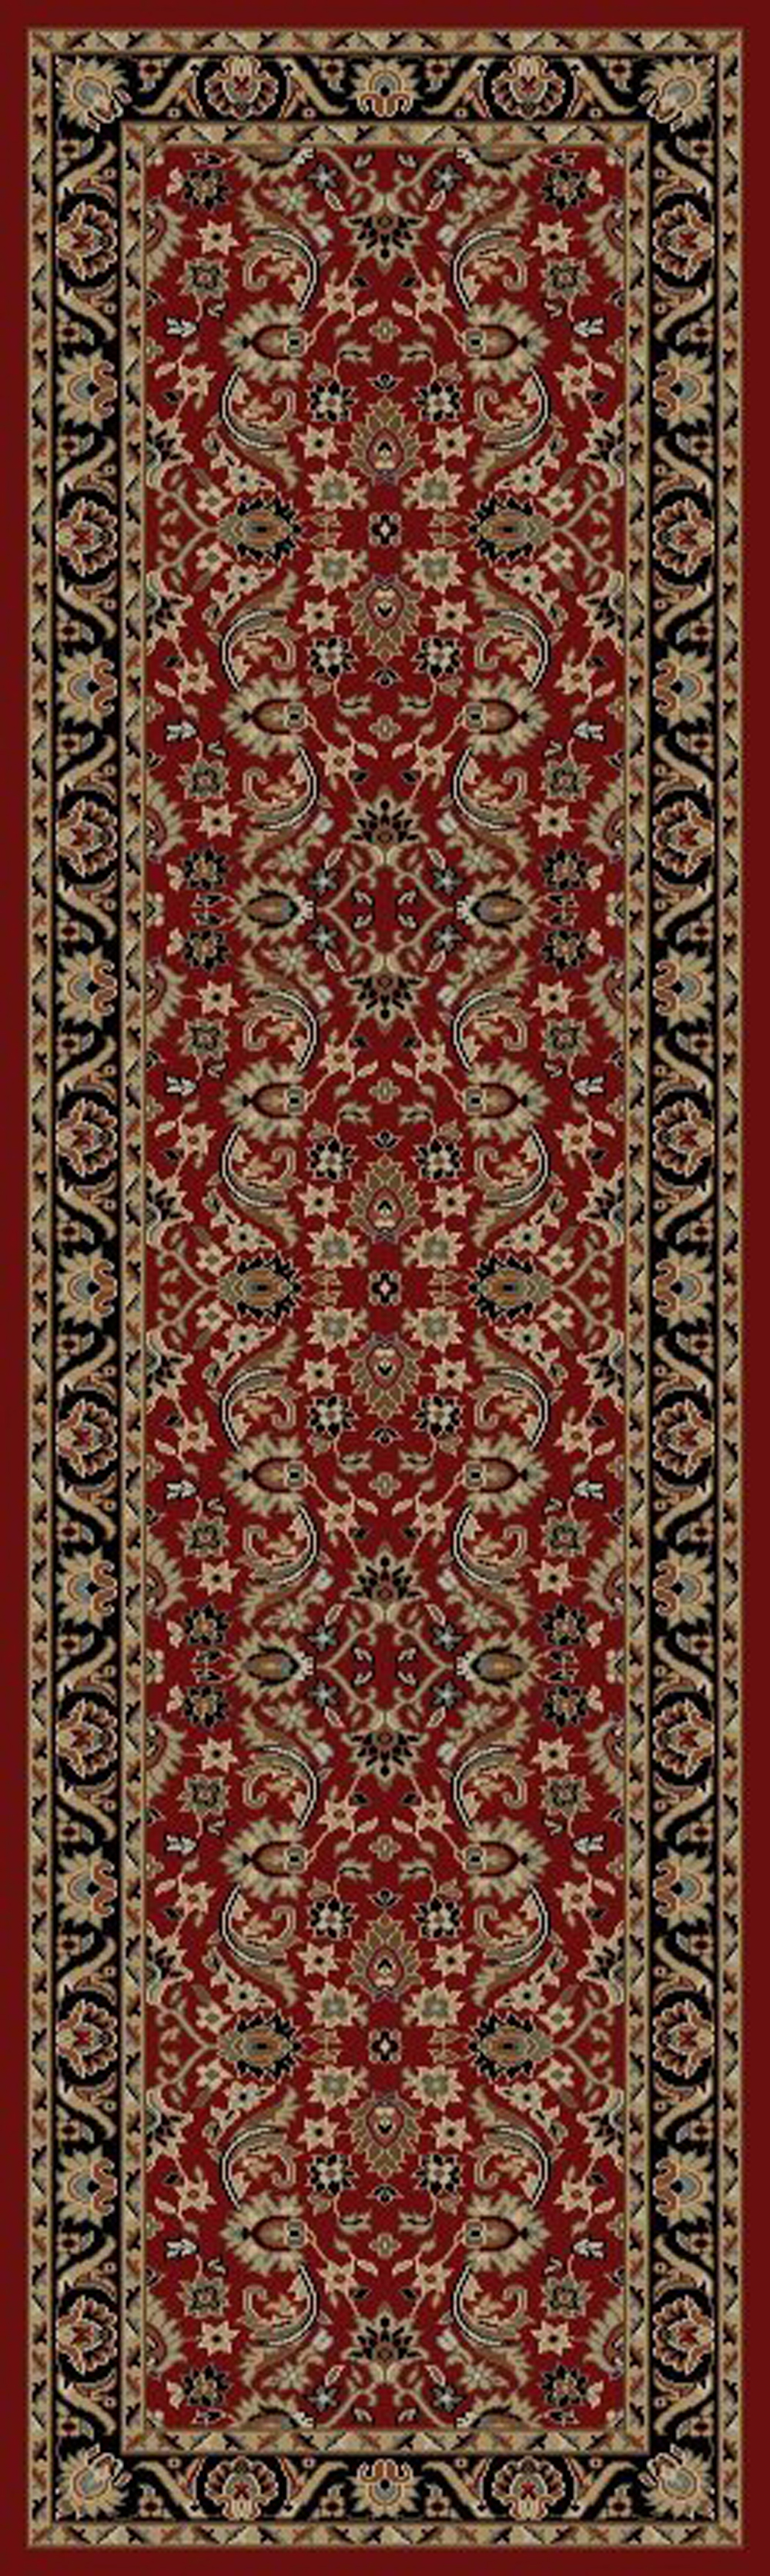 Concord Global Ankara SULTANABAD RED Rug